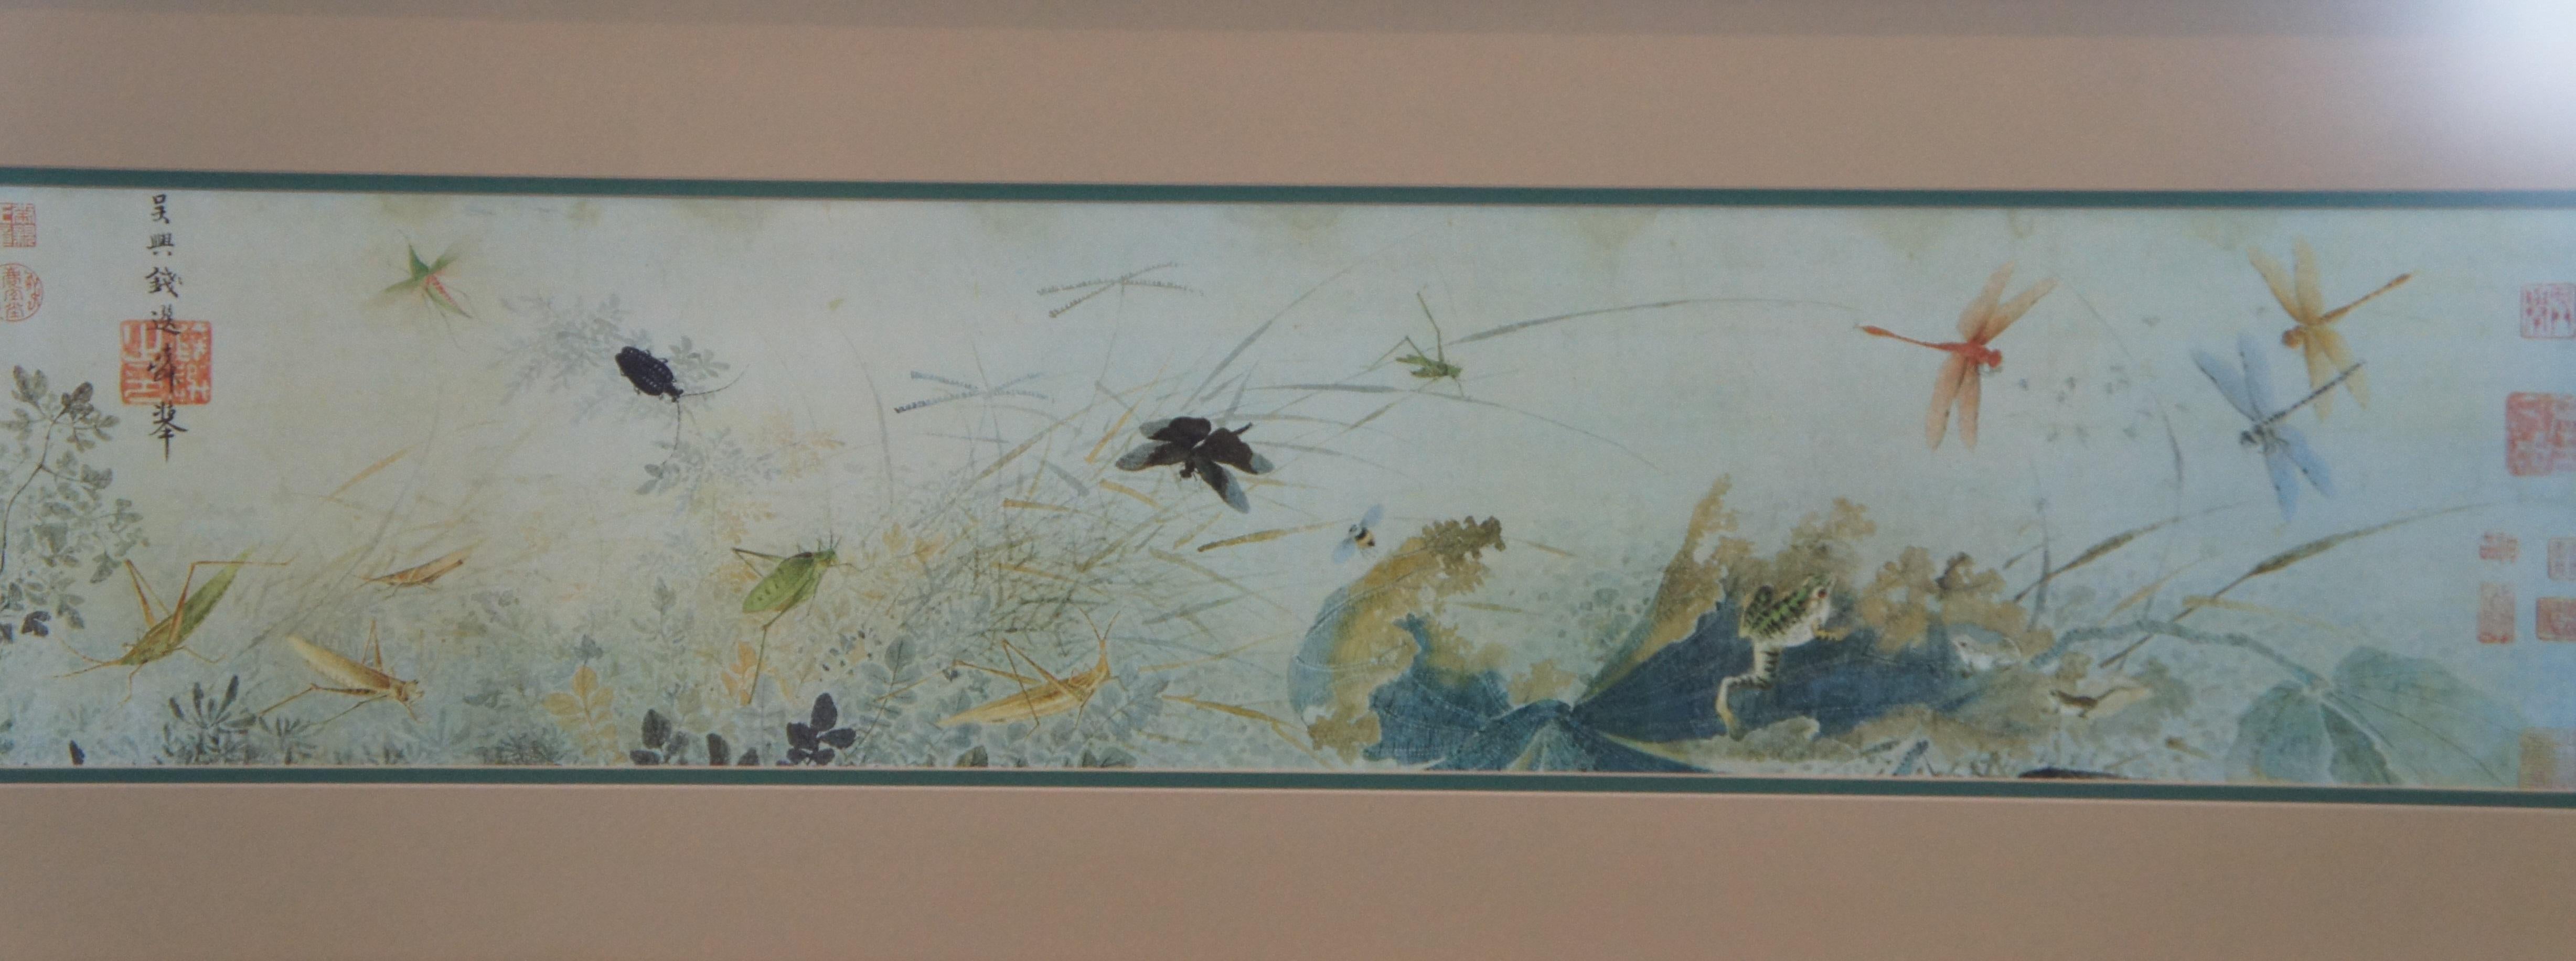 Qian Xuan Early Autumn Insects & Grass Chinese Chinoiserie Lithograph Print 43